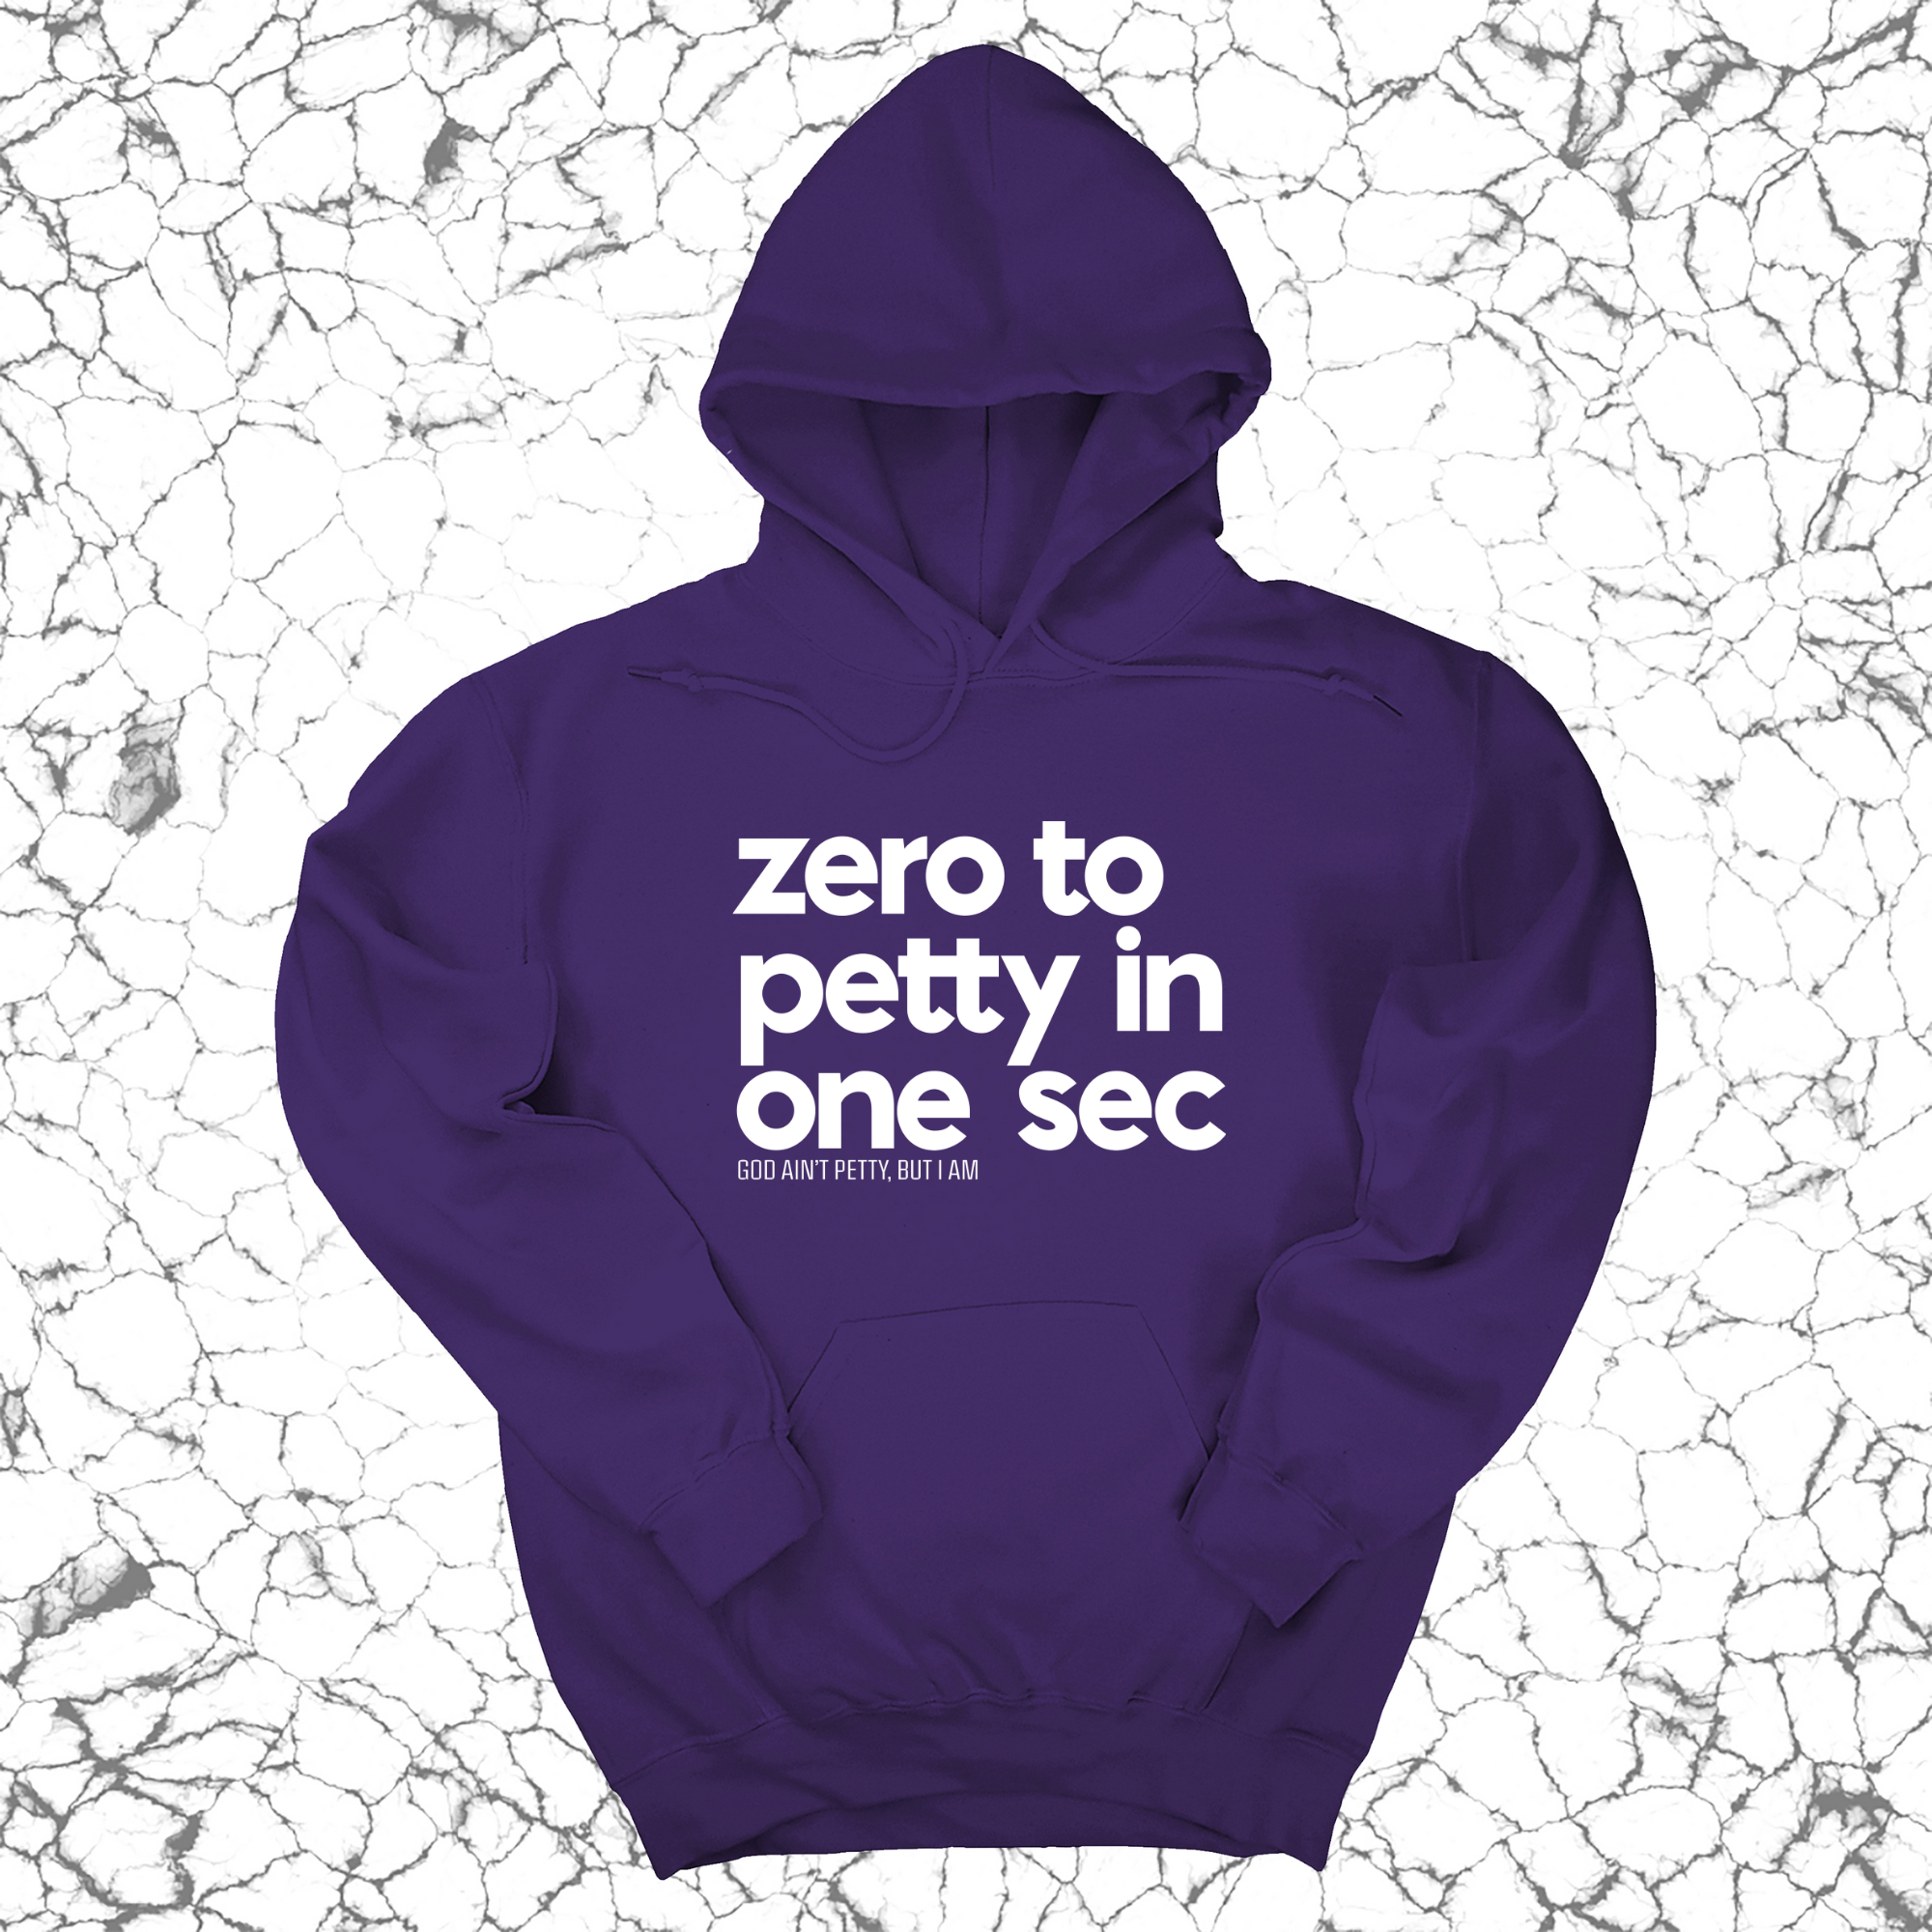 Zero to petty in one sec Unisex Hoodie-Hoodie-The Original God Ain't Petty But I Am